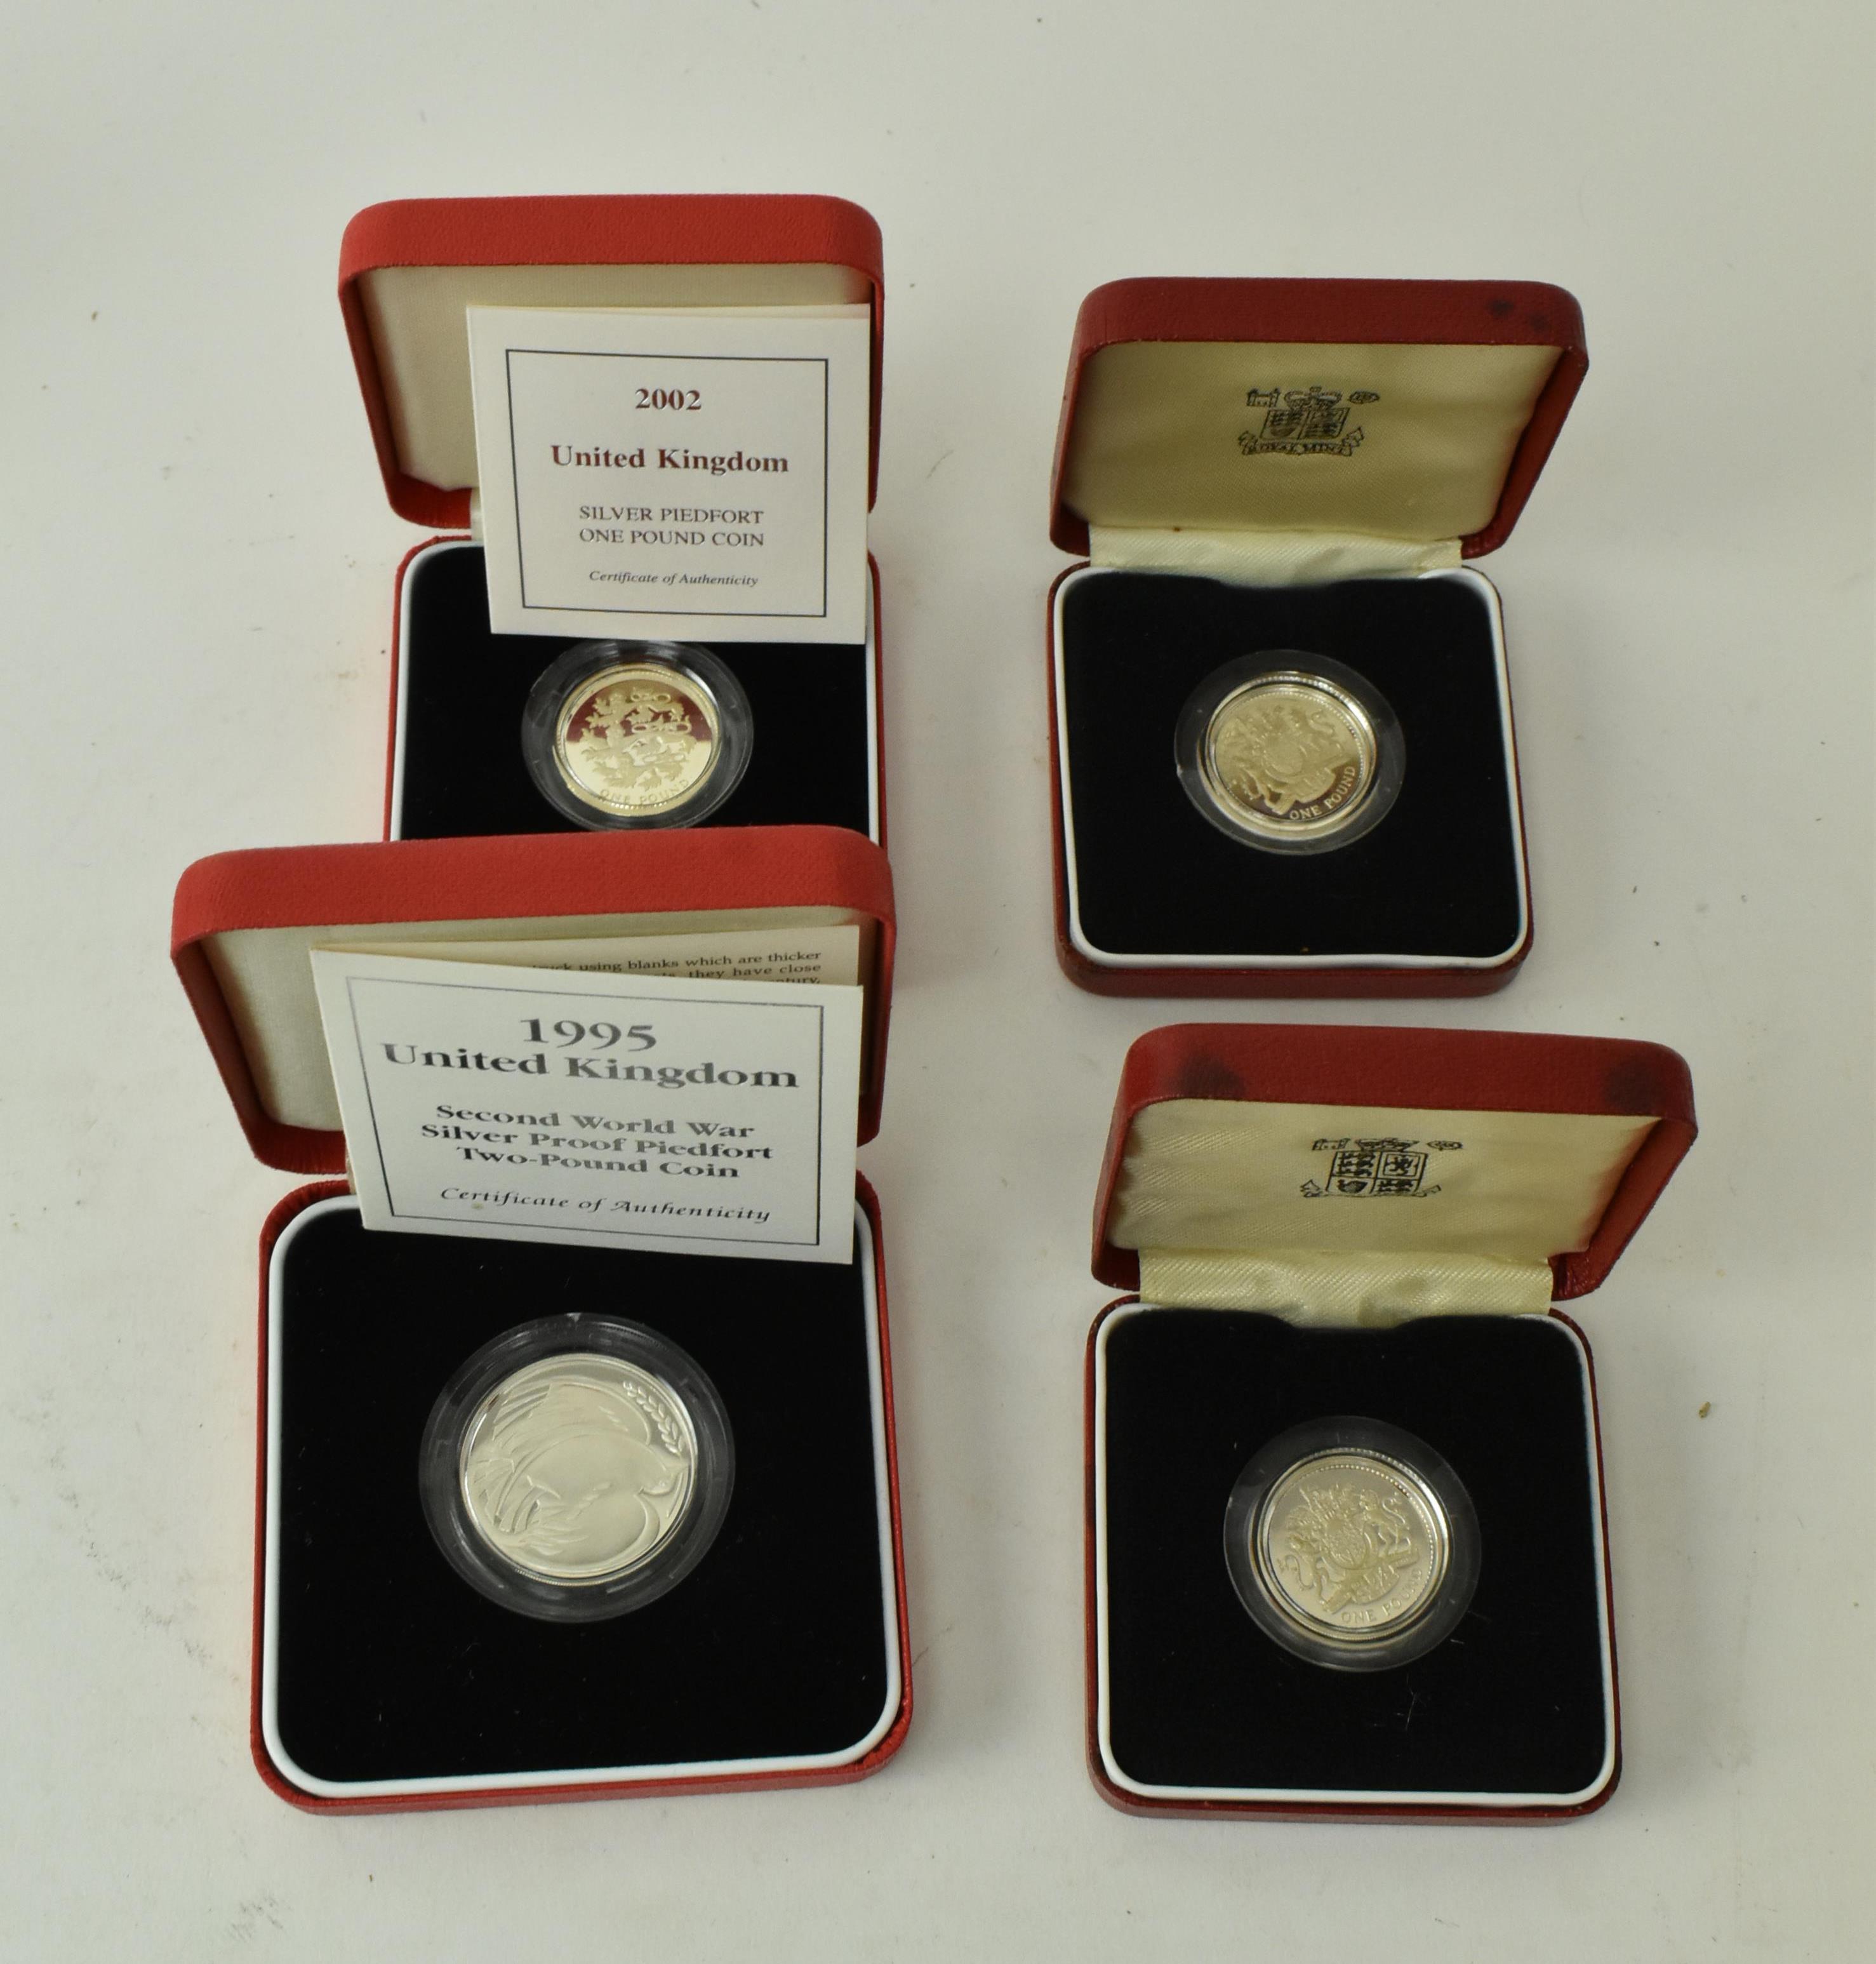 ROYAL MINT SILVER PROOF COLLECTION OF 17 ONE POUND COINS - Image 4 of 5